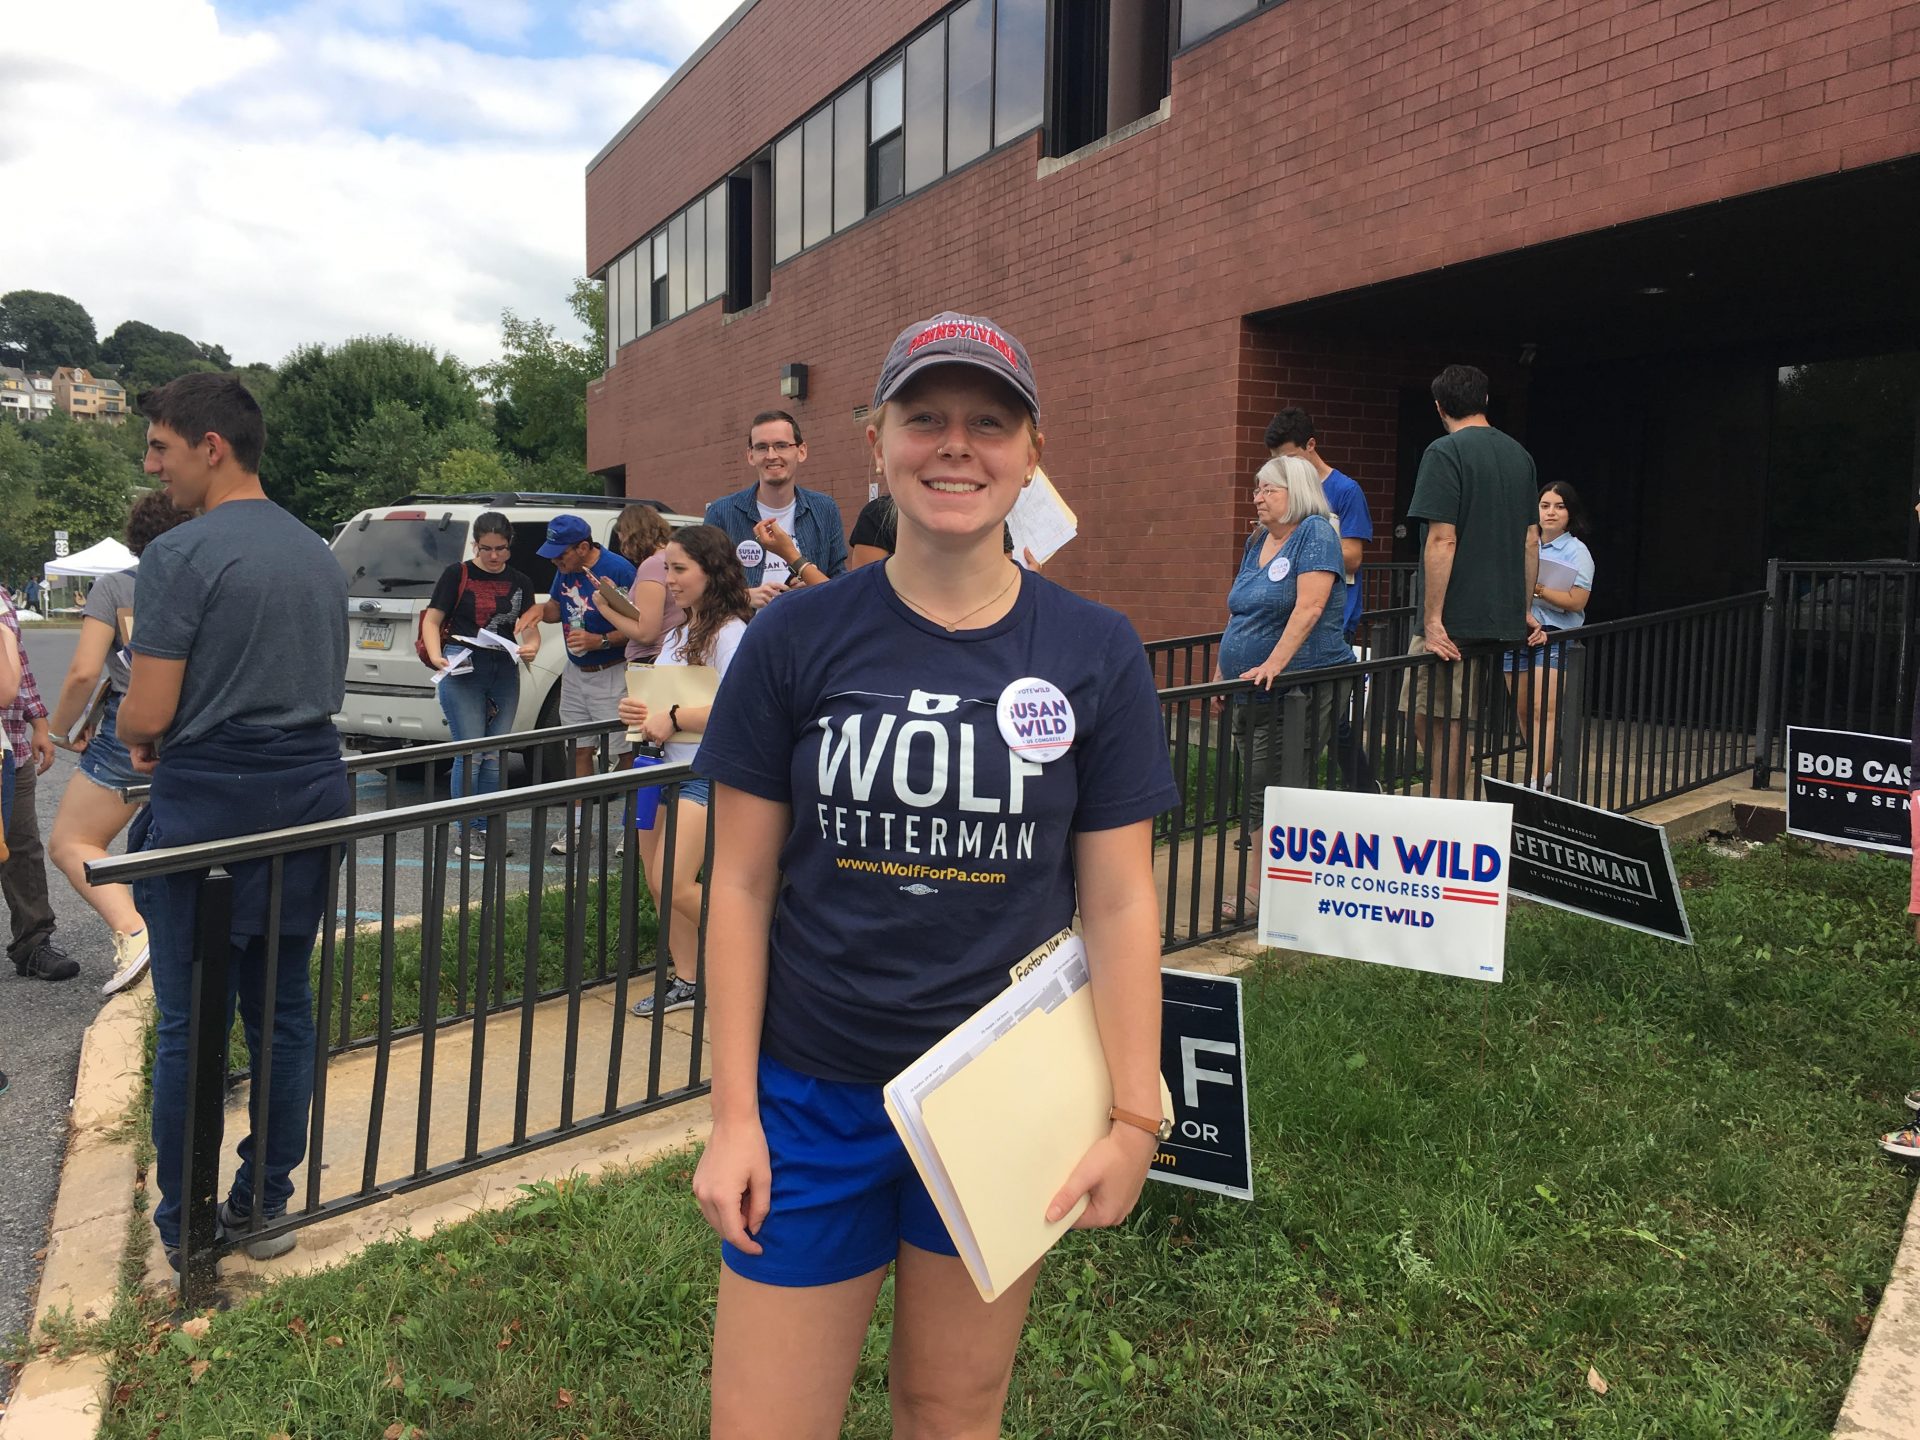 E. J. Carlson, a student at the University of Pennsylvania, travelled to Easton on Sept. 15, 2018, to campaign for Democratic congressional candidate Susan Wild.